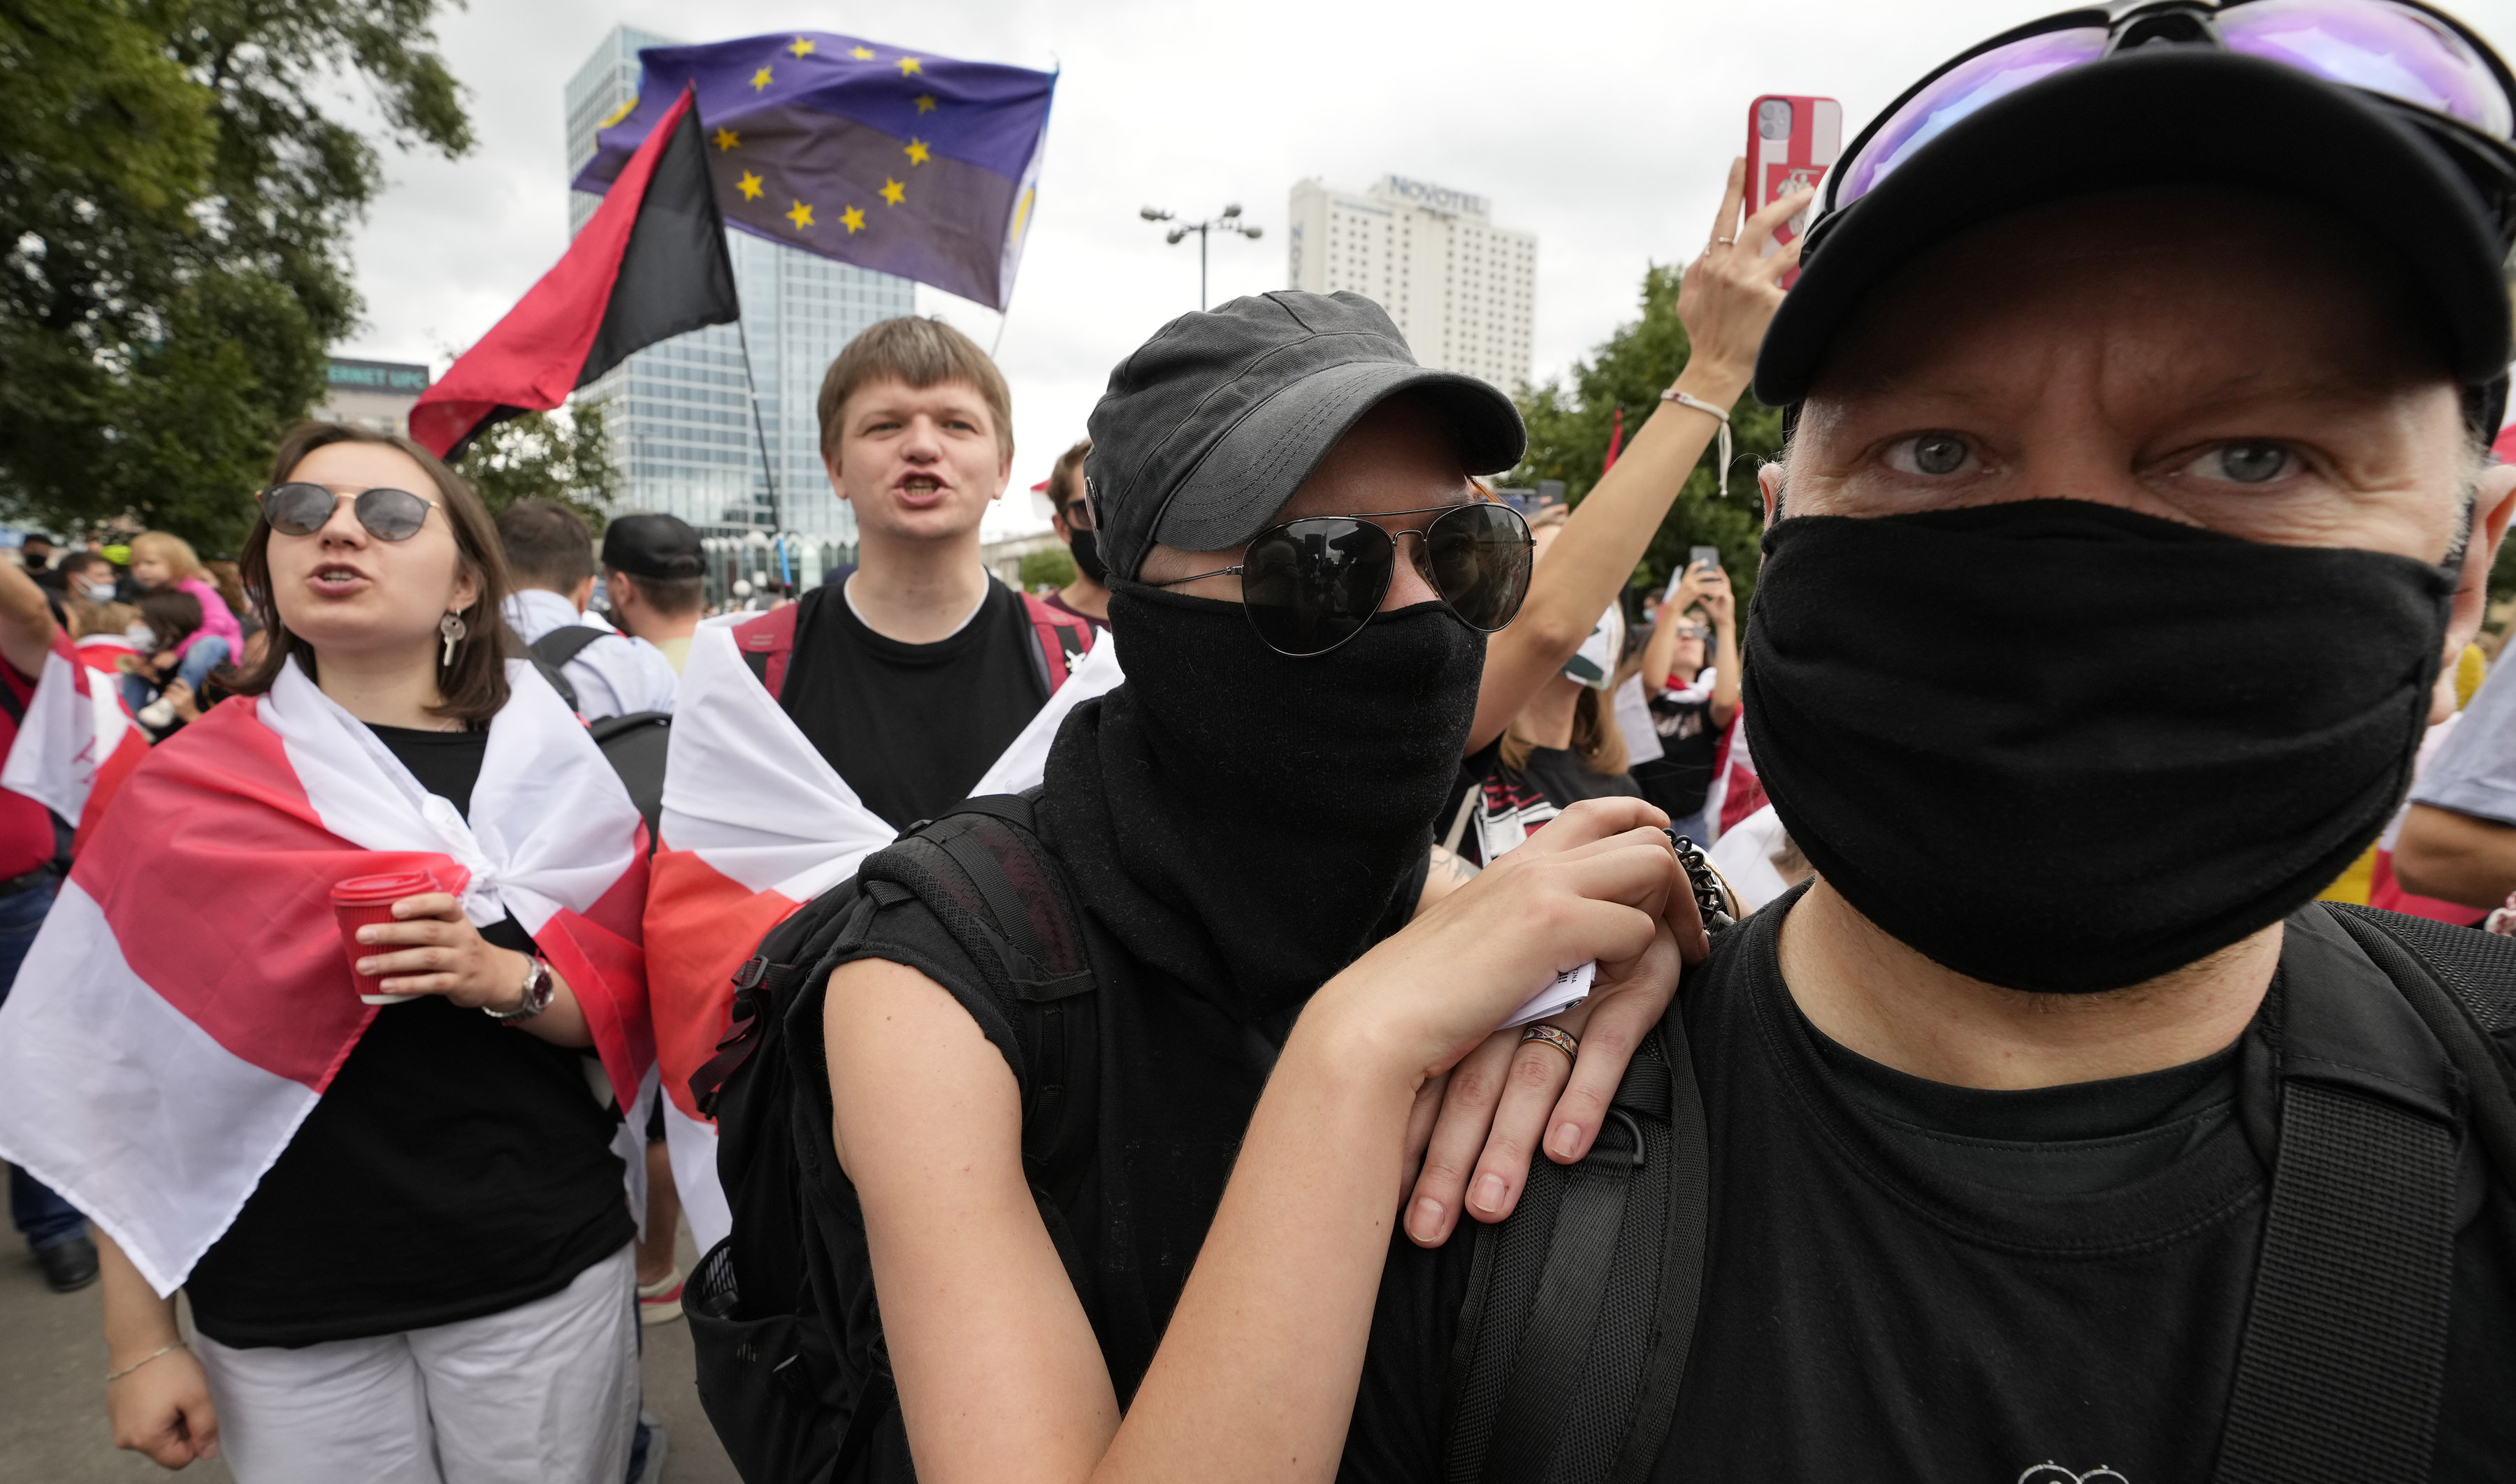 Protesters on the march in Warsaw